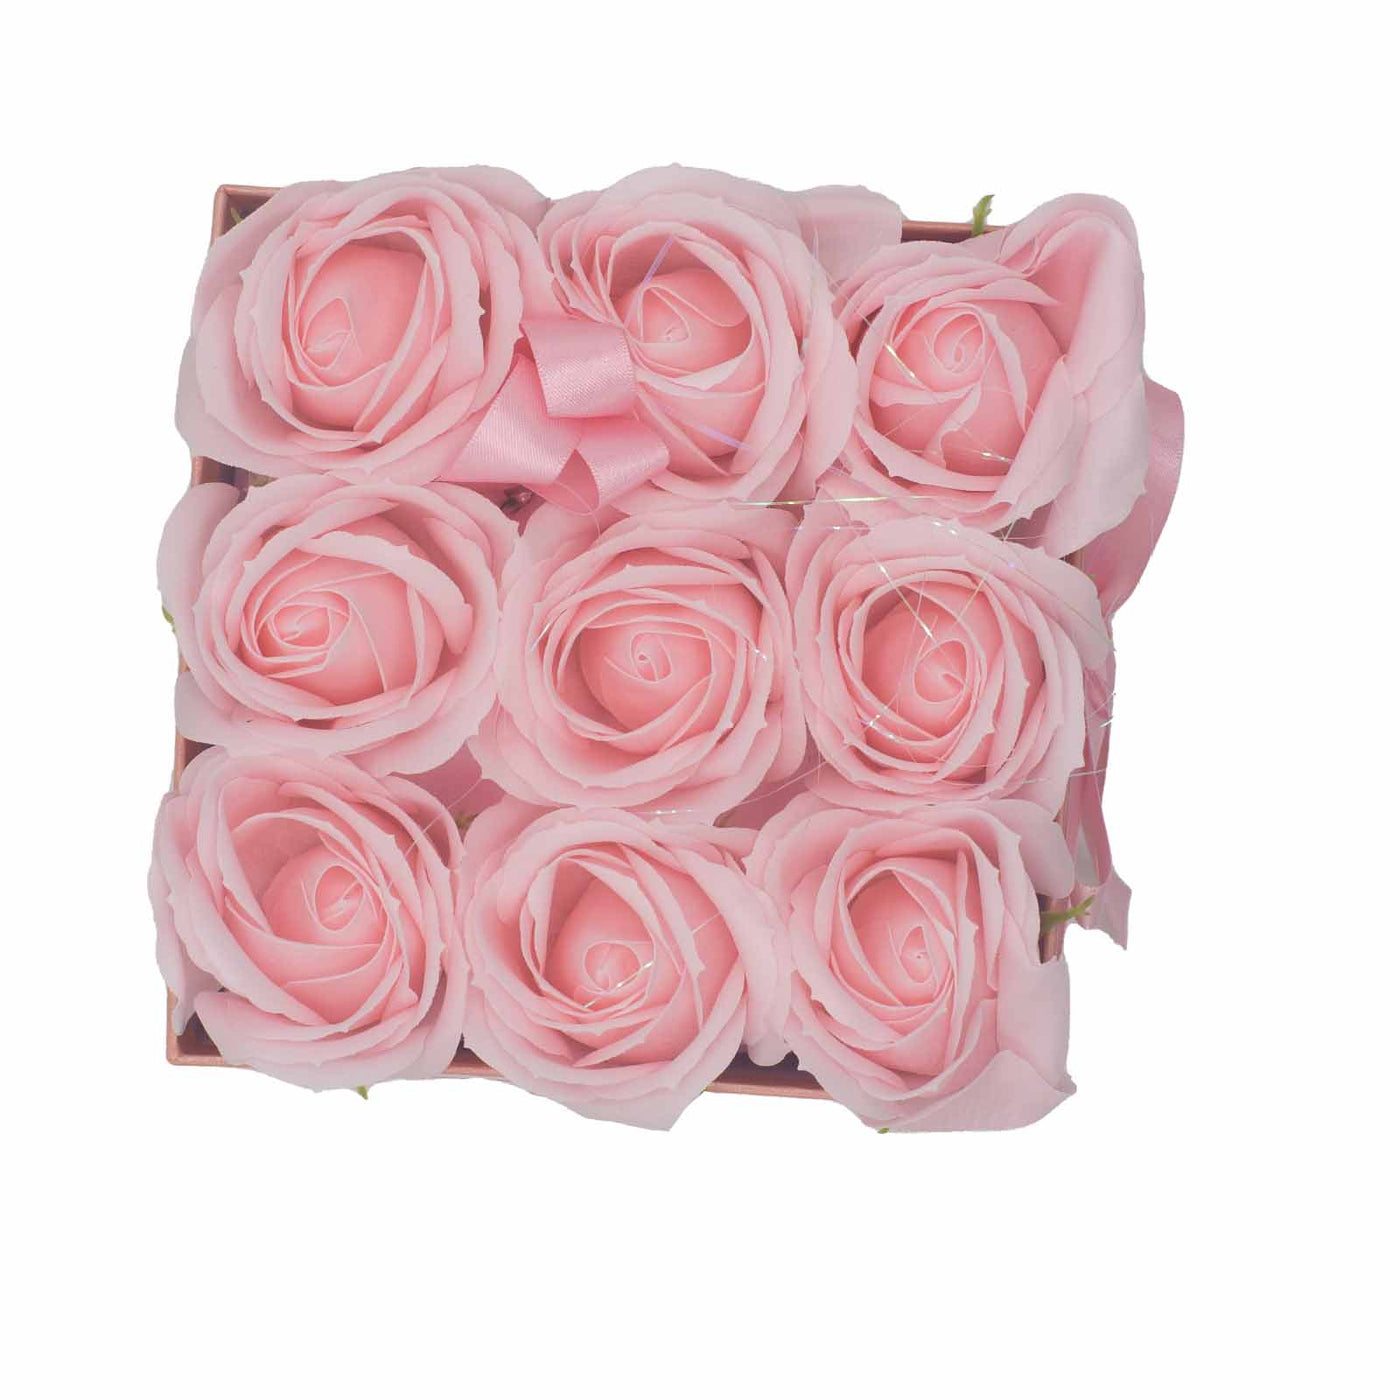 Body Soap Fragranced Flowers Gift Pink Rose Bouquet - 9 Pink Red Roses In Gift Box.